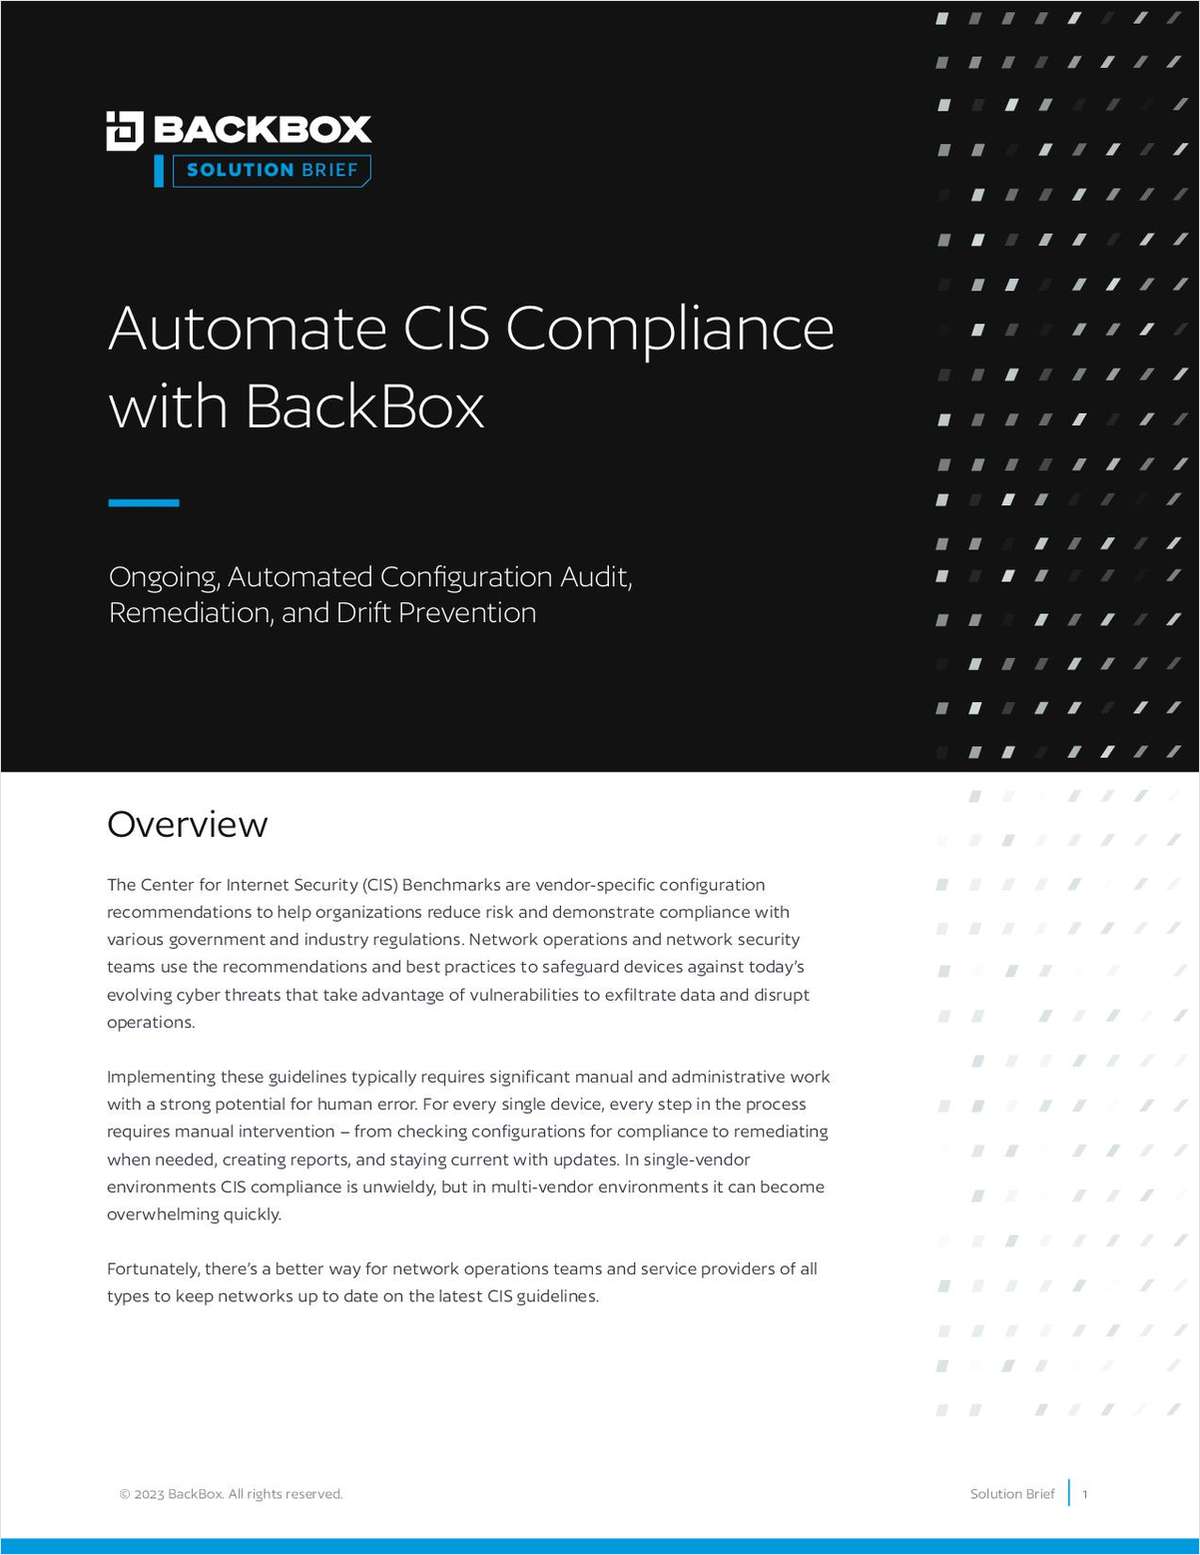 Automate CIS Compliance with BackBox